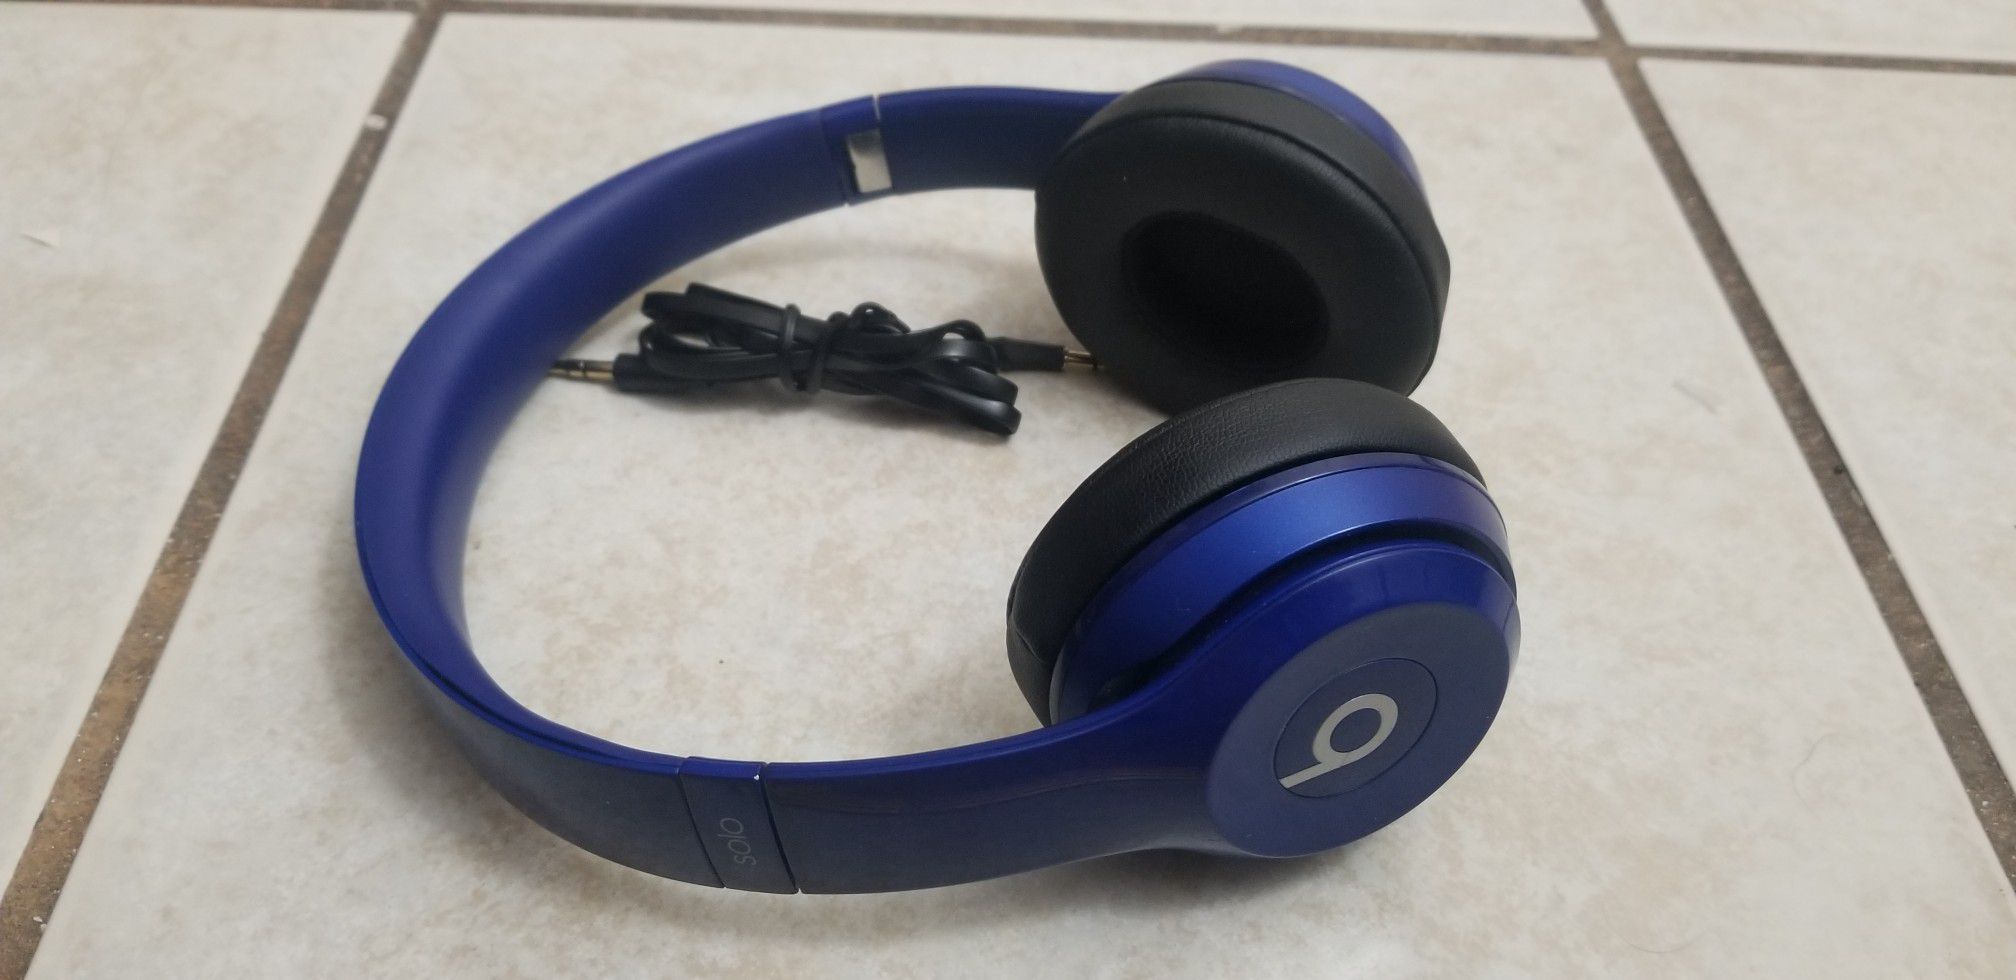 Beats by dr dre solo 2 blue wired